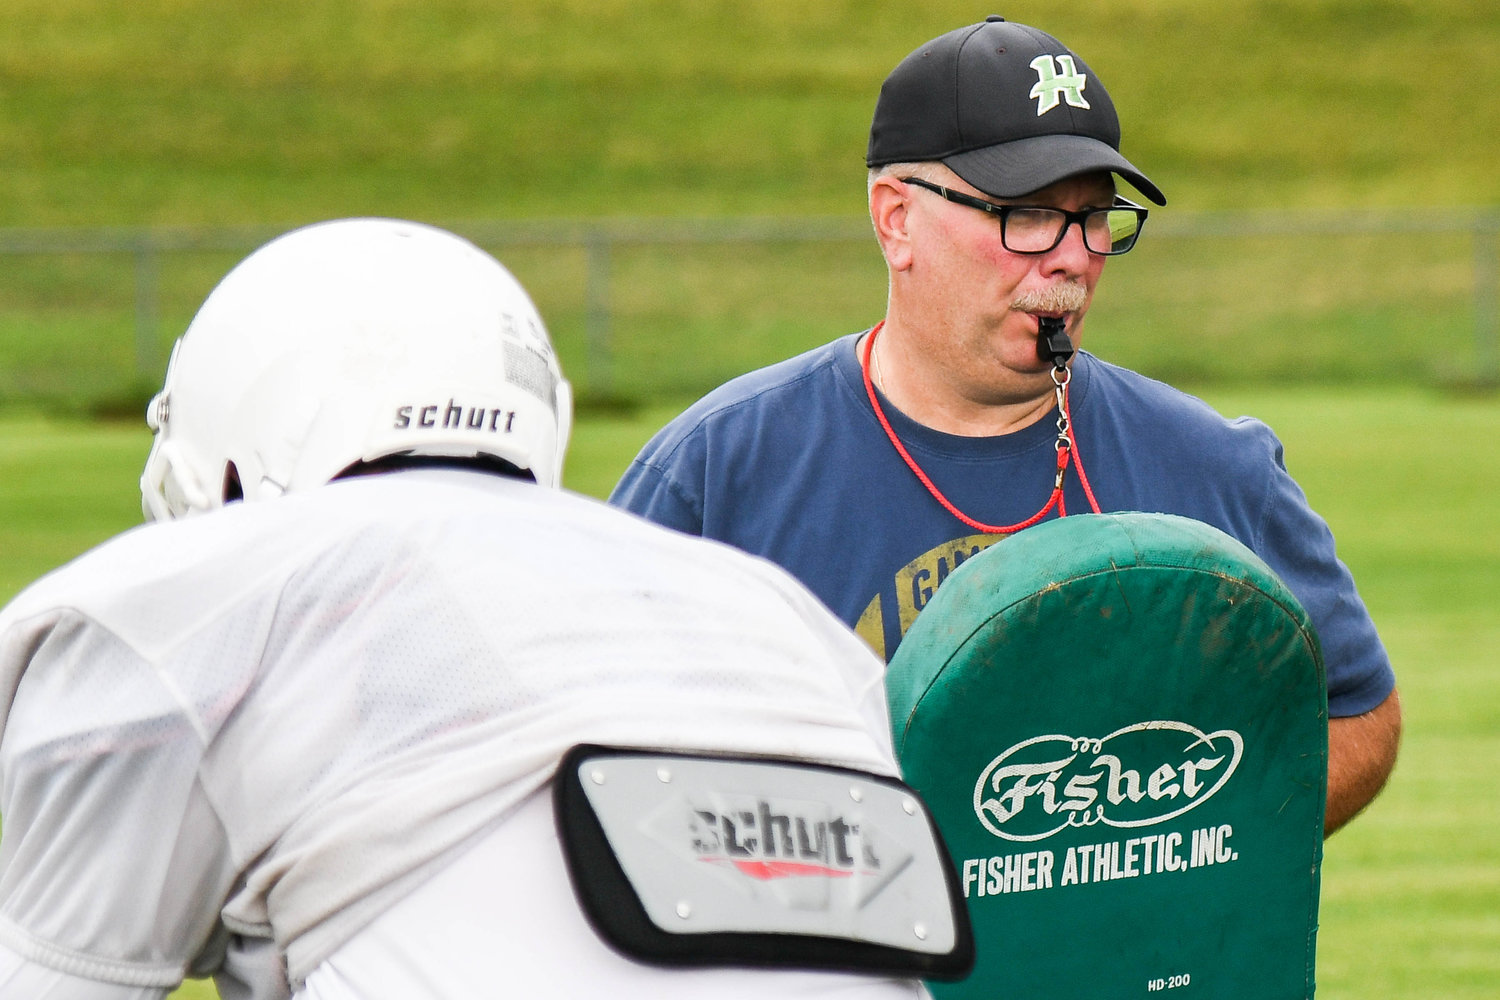 Herkimer head coach Mike Jory runs drills with linemen during practice. Jory is in his second season as Herkimer’s coach.